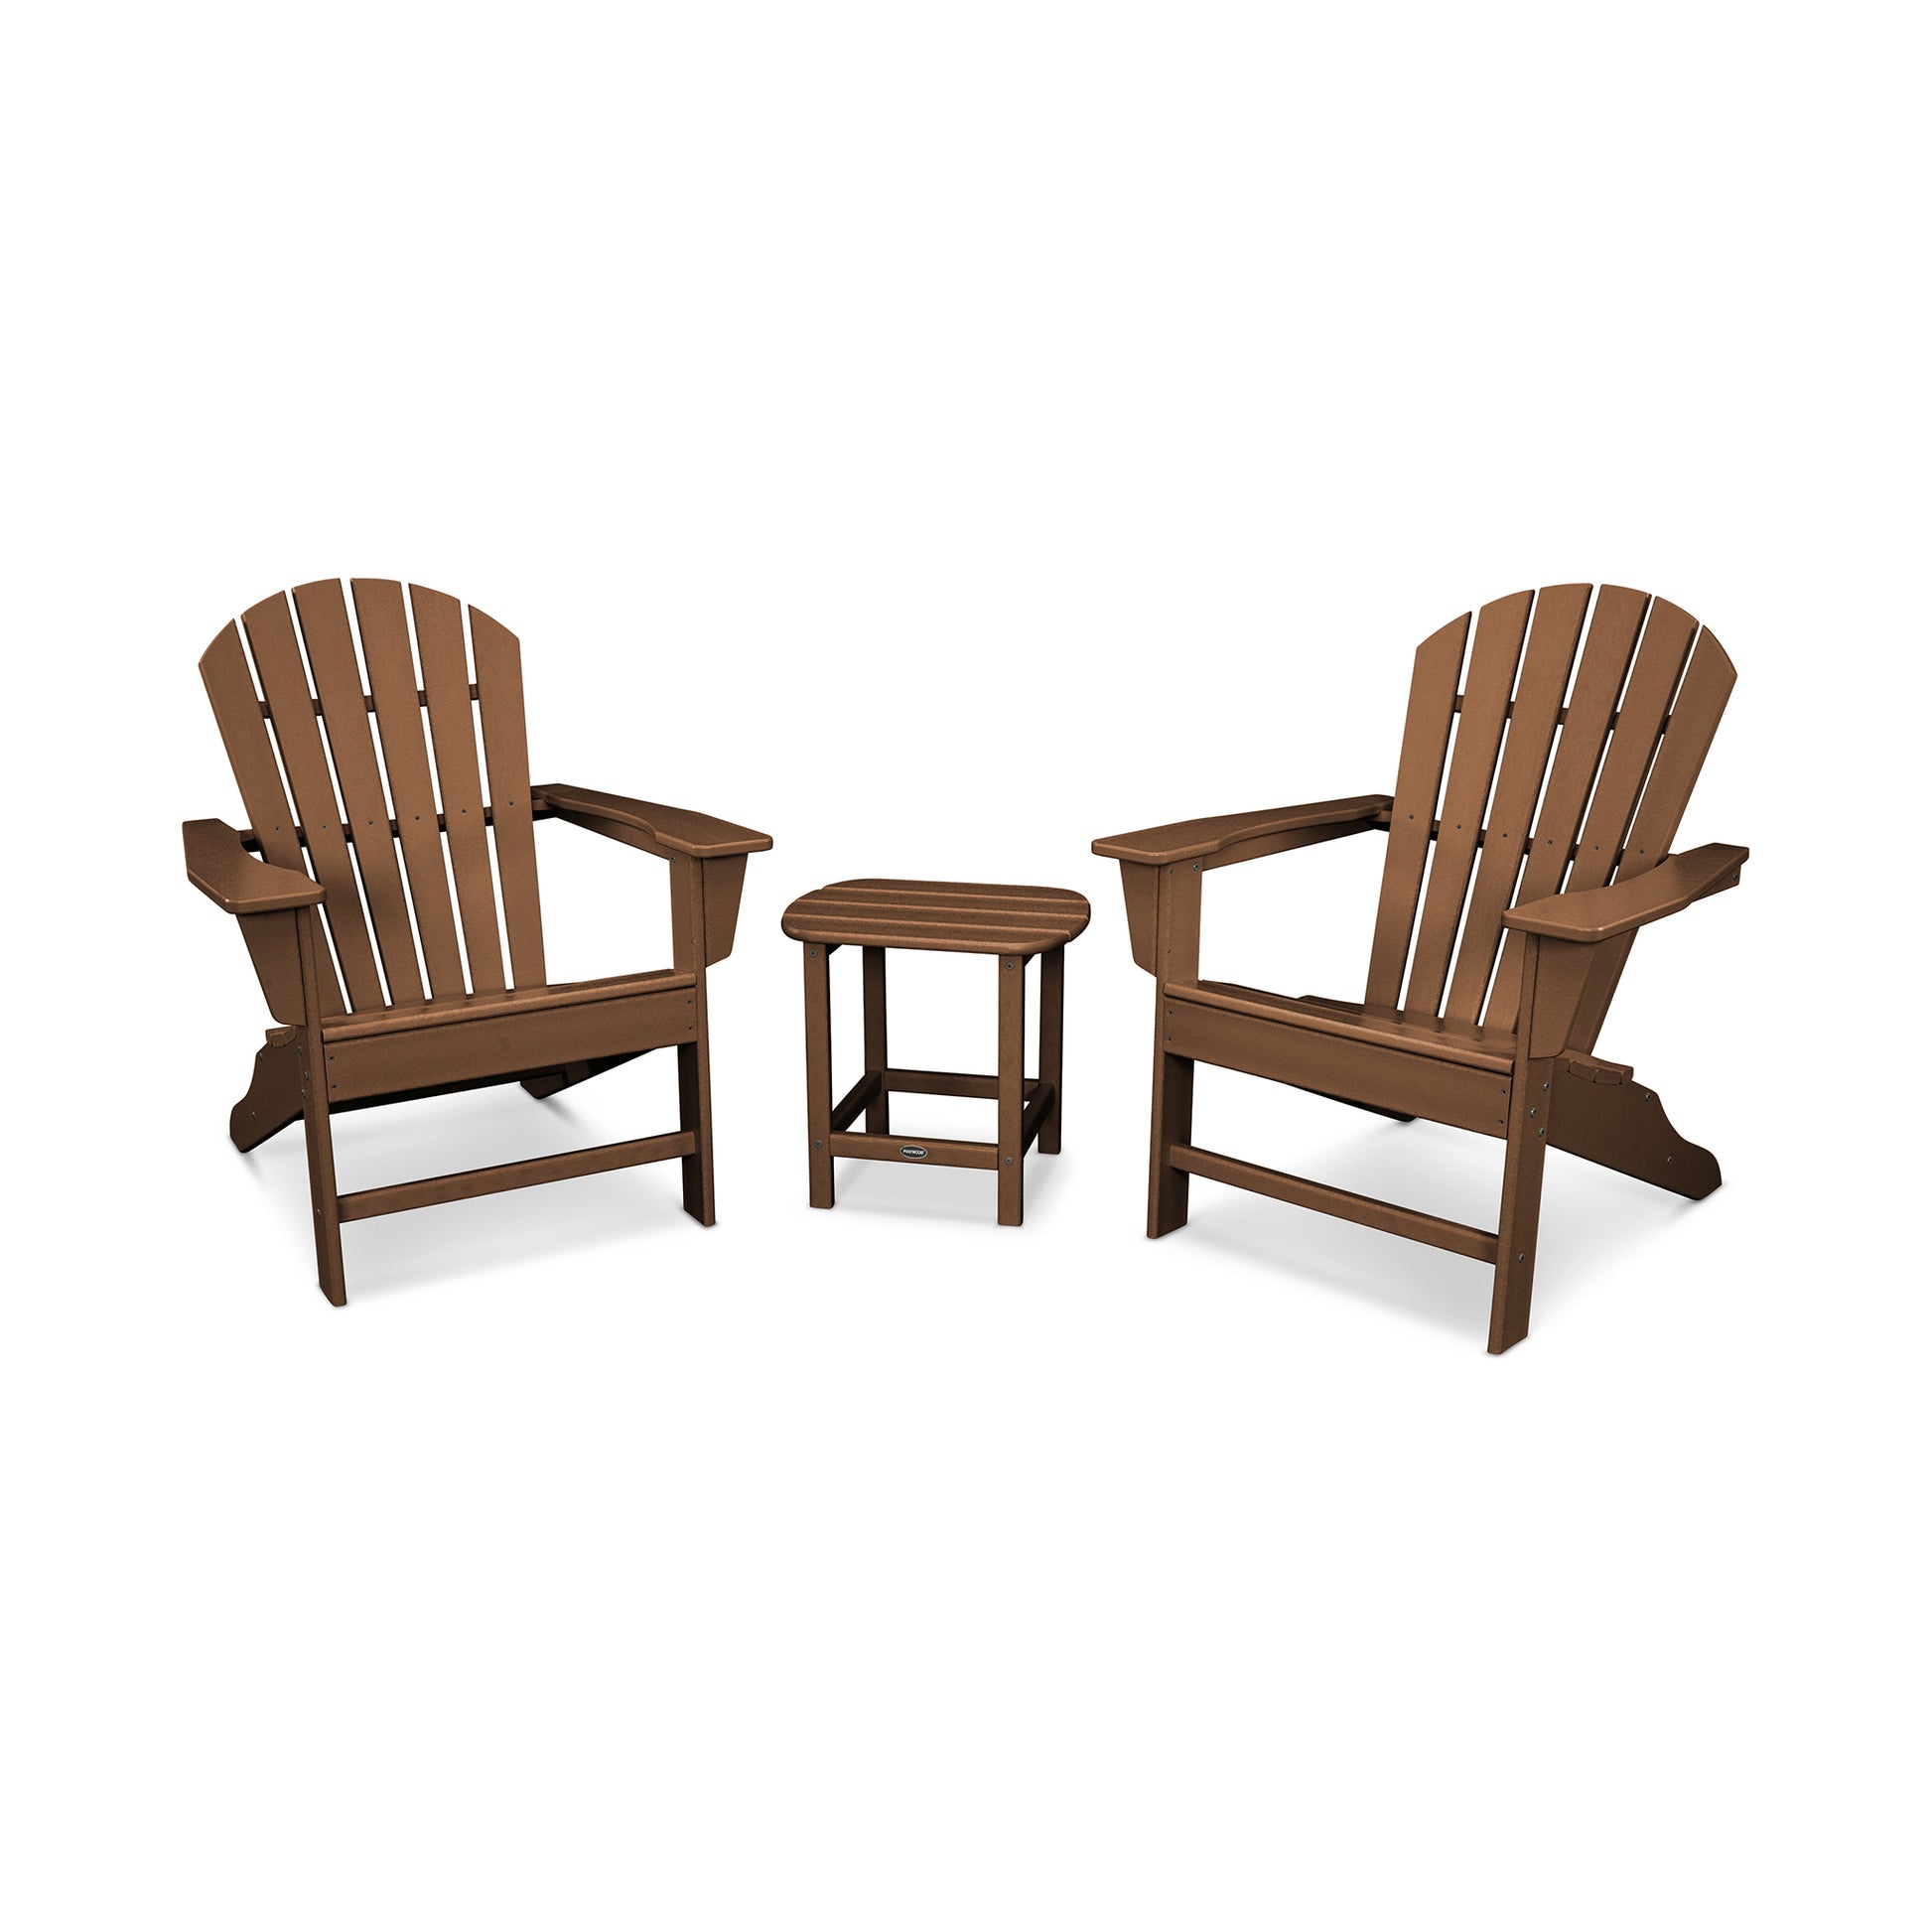 Two brown POLYWOOD South Beach Adirondack chairs and a matching small side table, set on a plain white background. The furniture is crafted from durable POLYWOOD lumber in a classic slatted style.